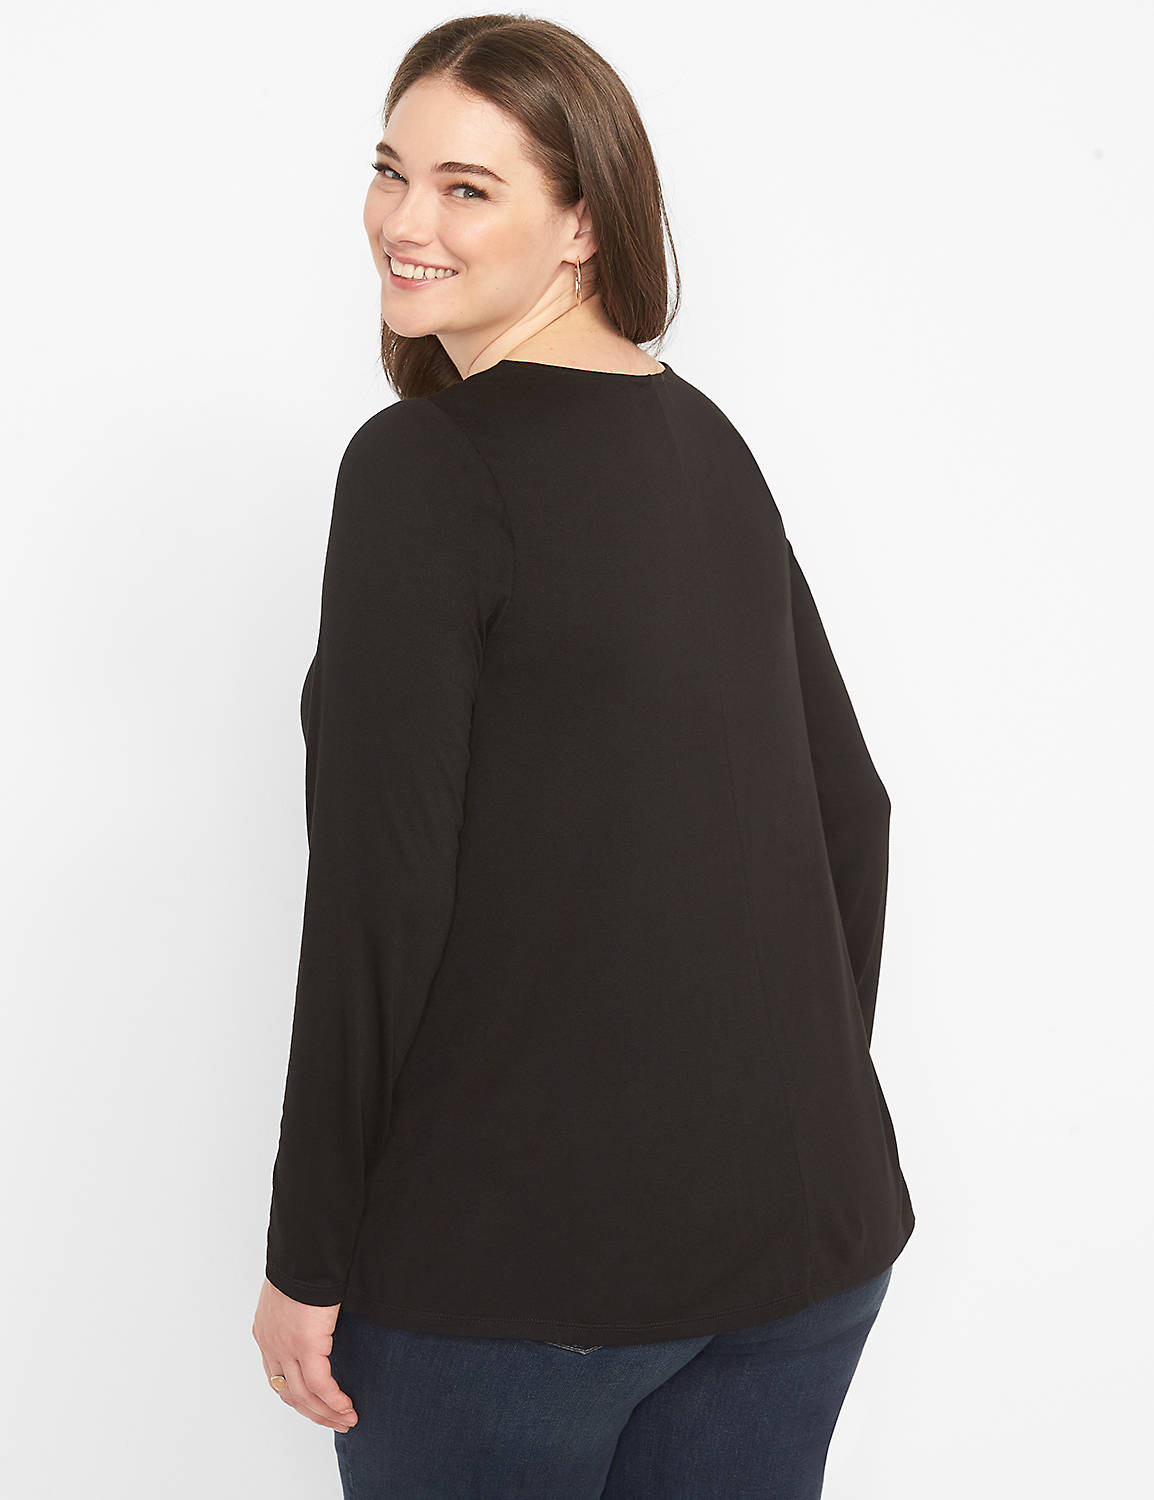 Long Sleeve Perfect Sleeve Wrap Front Swing Tee 1127632:Ascena Black:10/12 Product Image 2